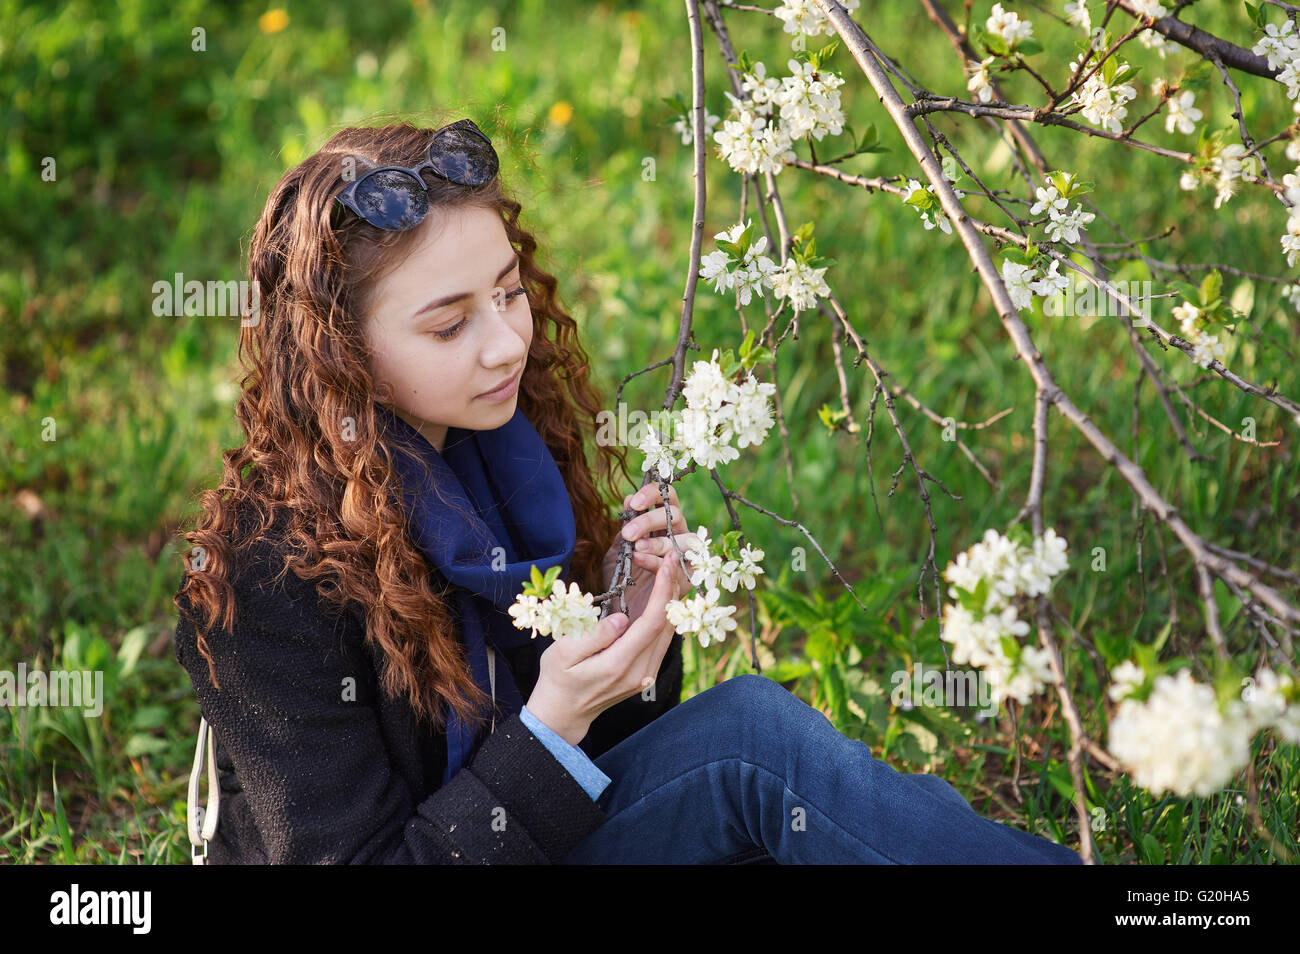 young woman in black coat walking in a blossoming spring garden Stock Photo